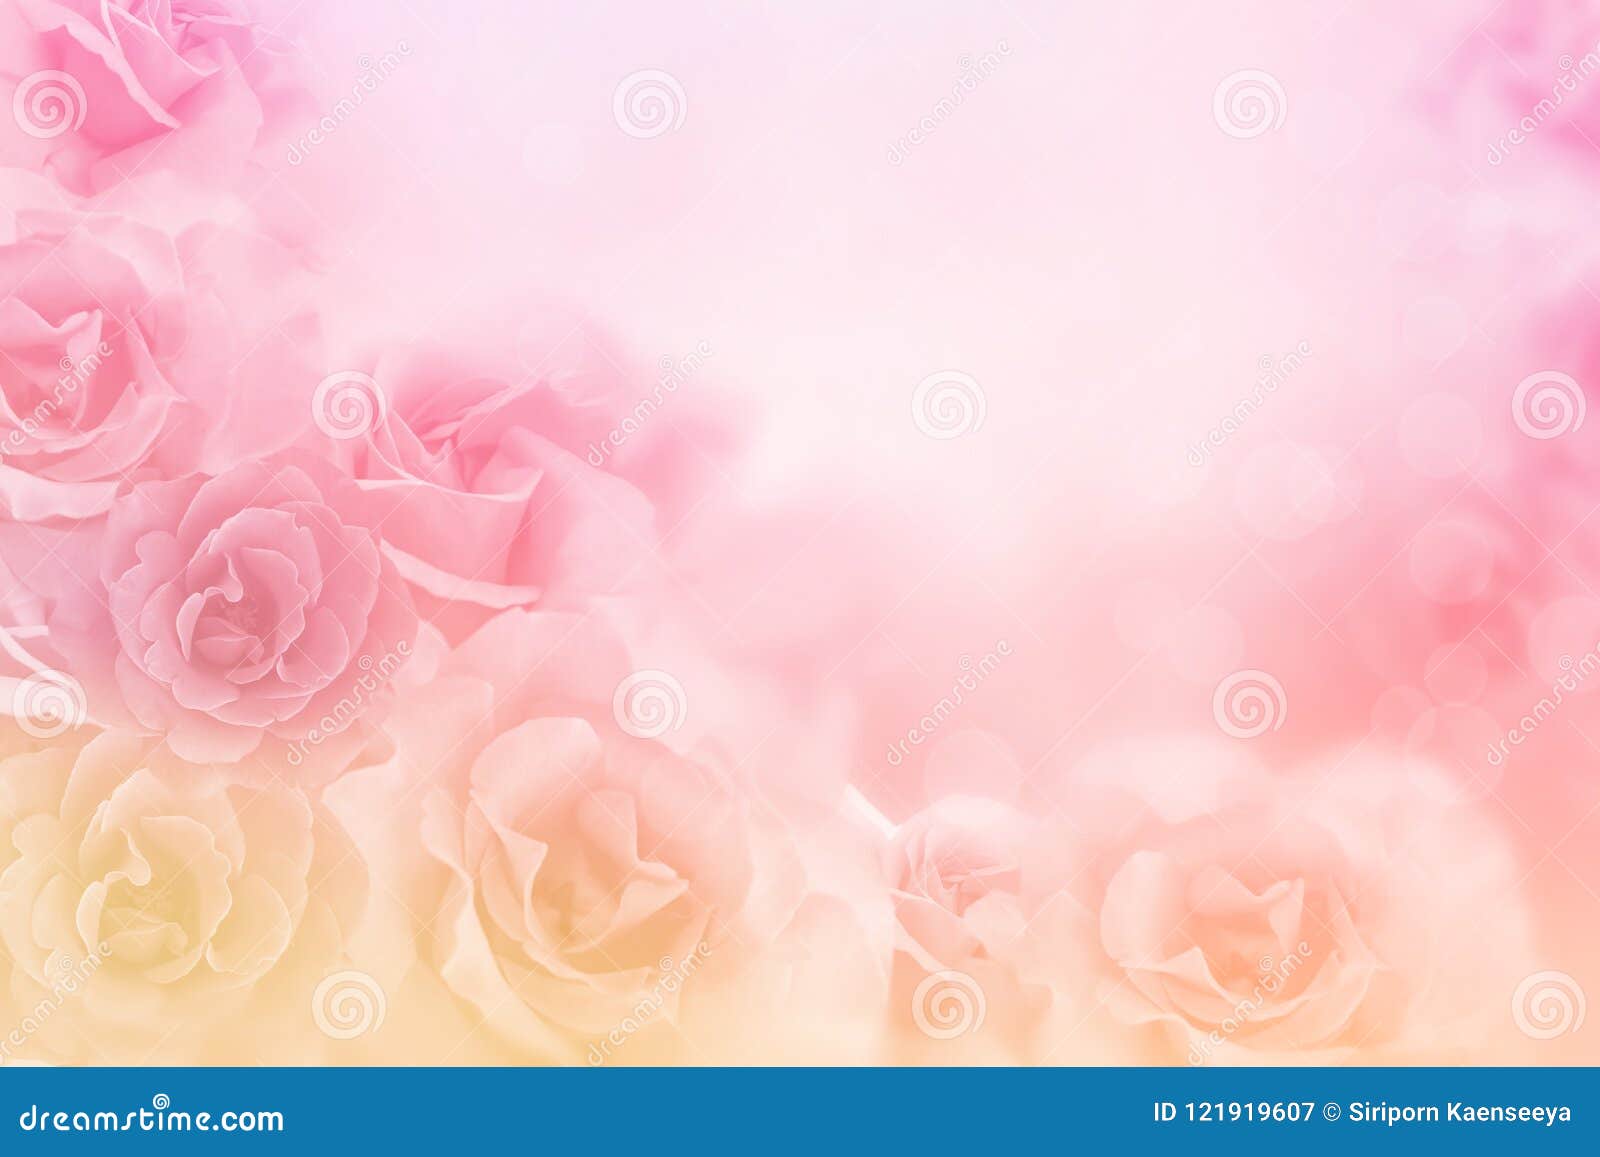 beautiful pink roses flower border on soft background for valentine